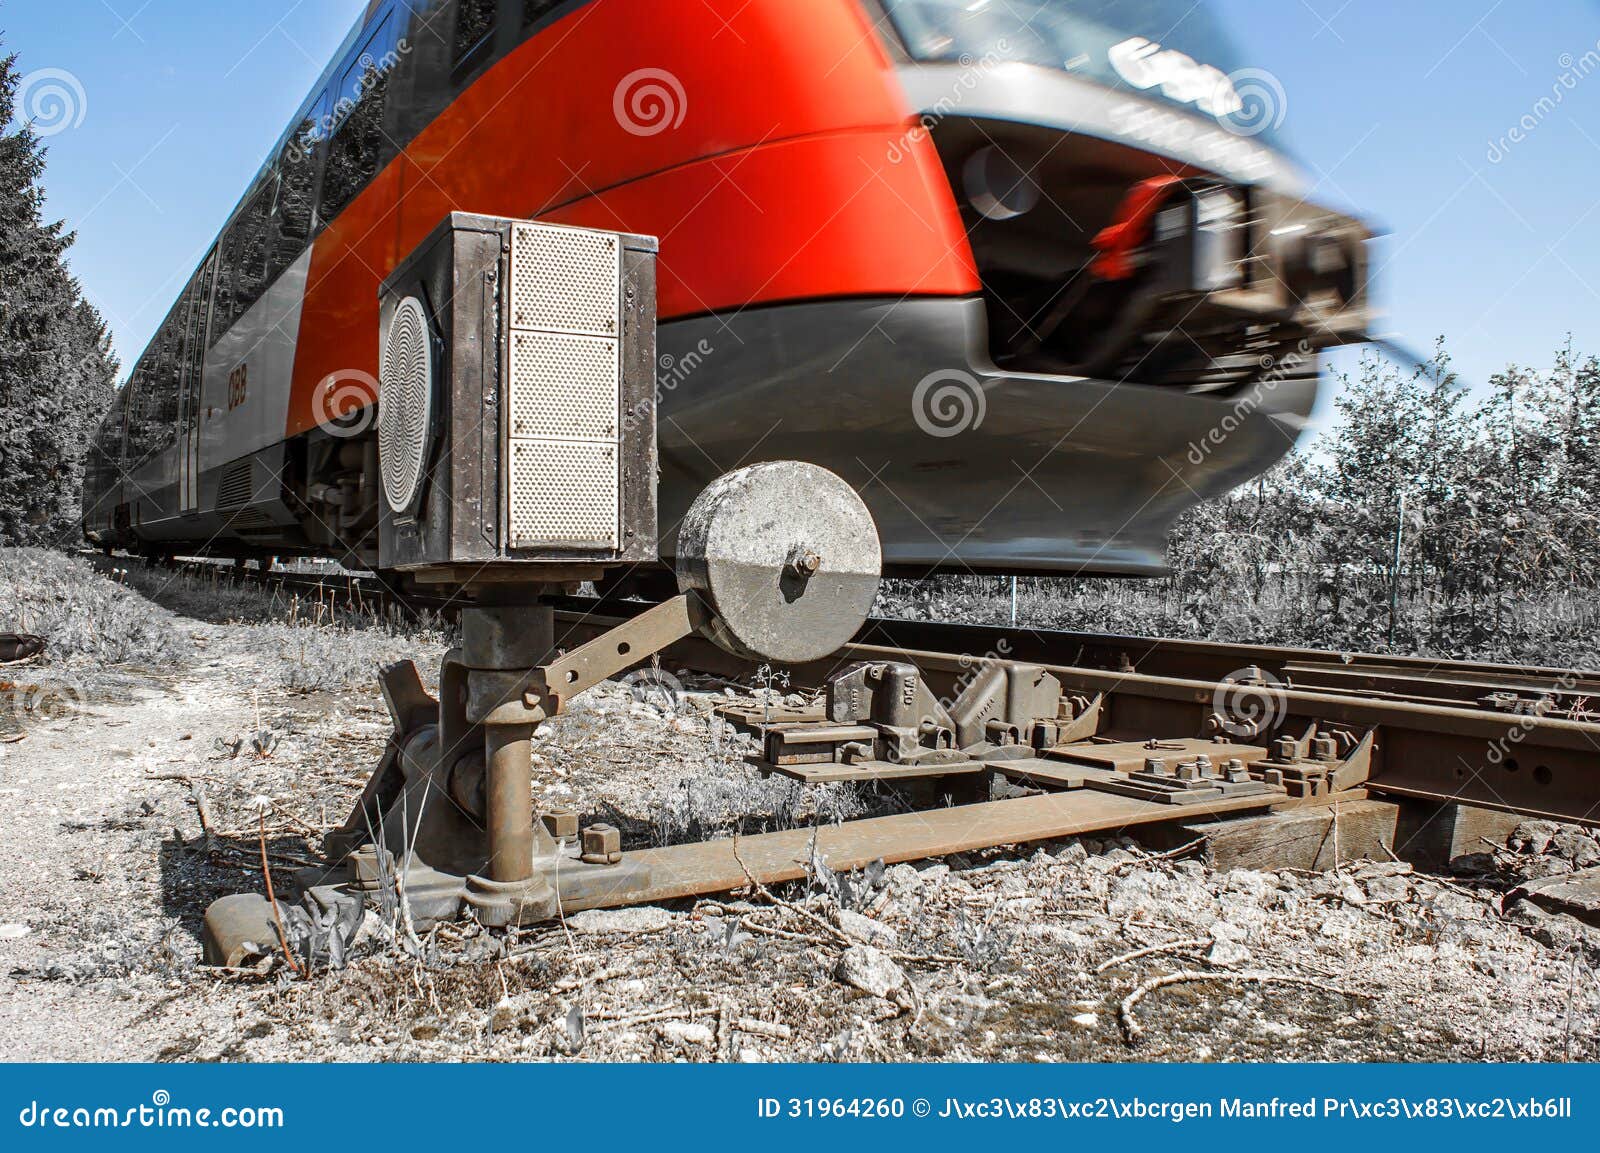 Detailed photographs of tracks, rails, railway and train.